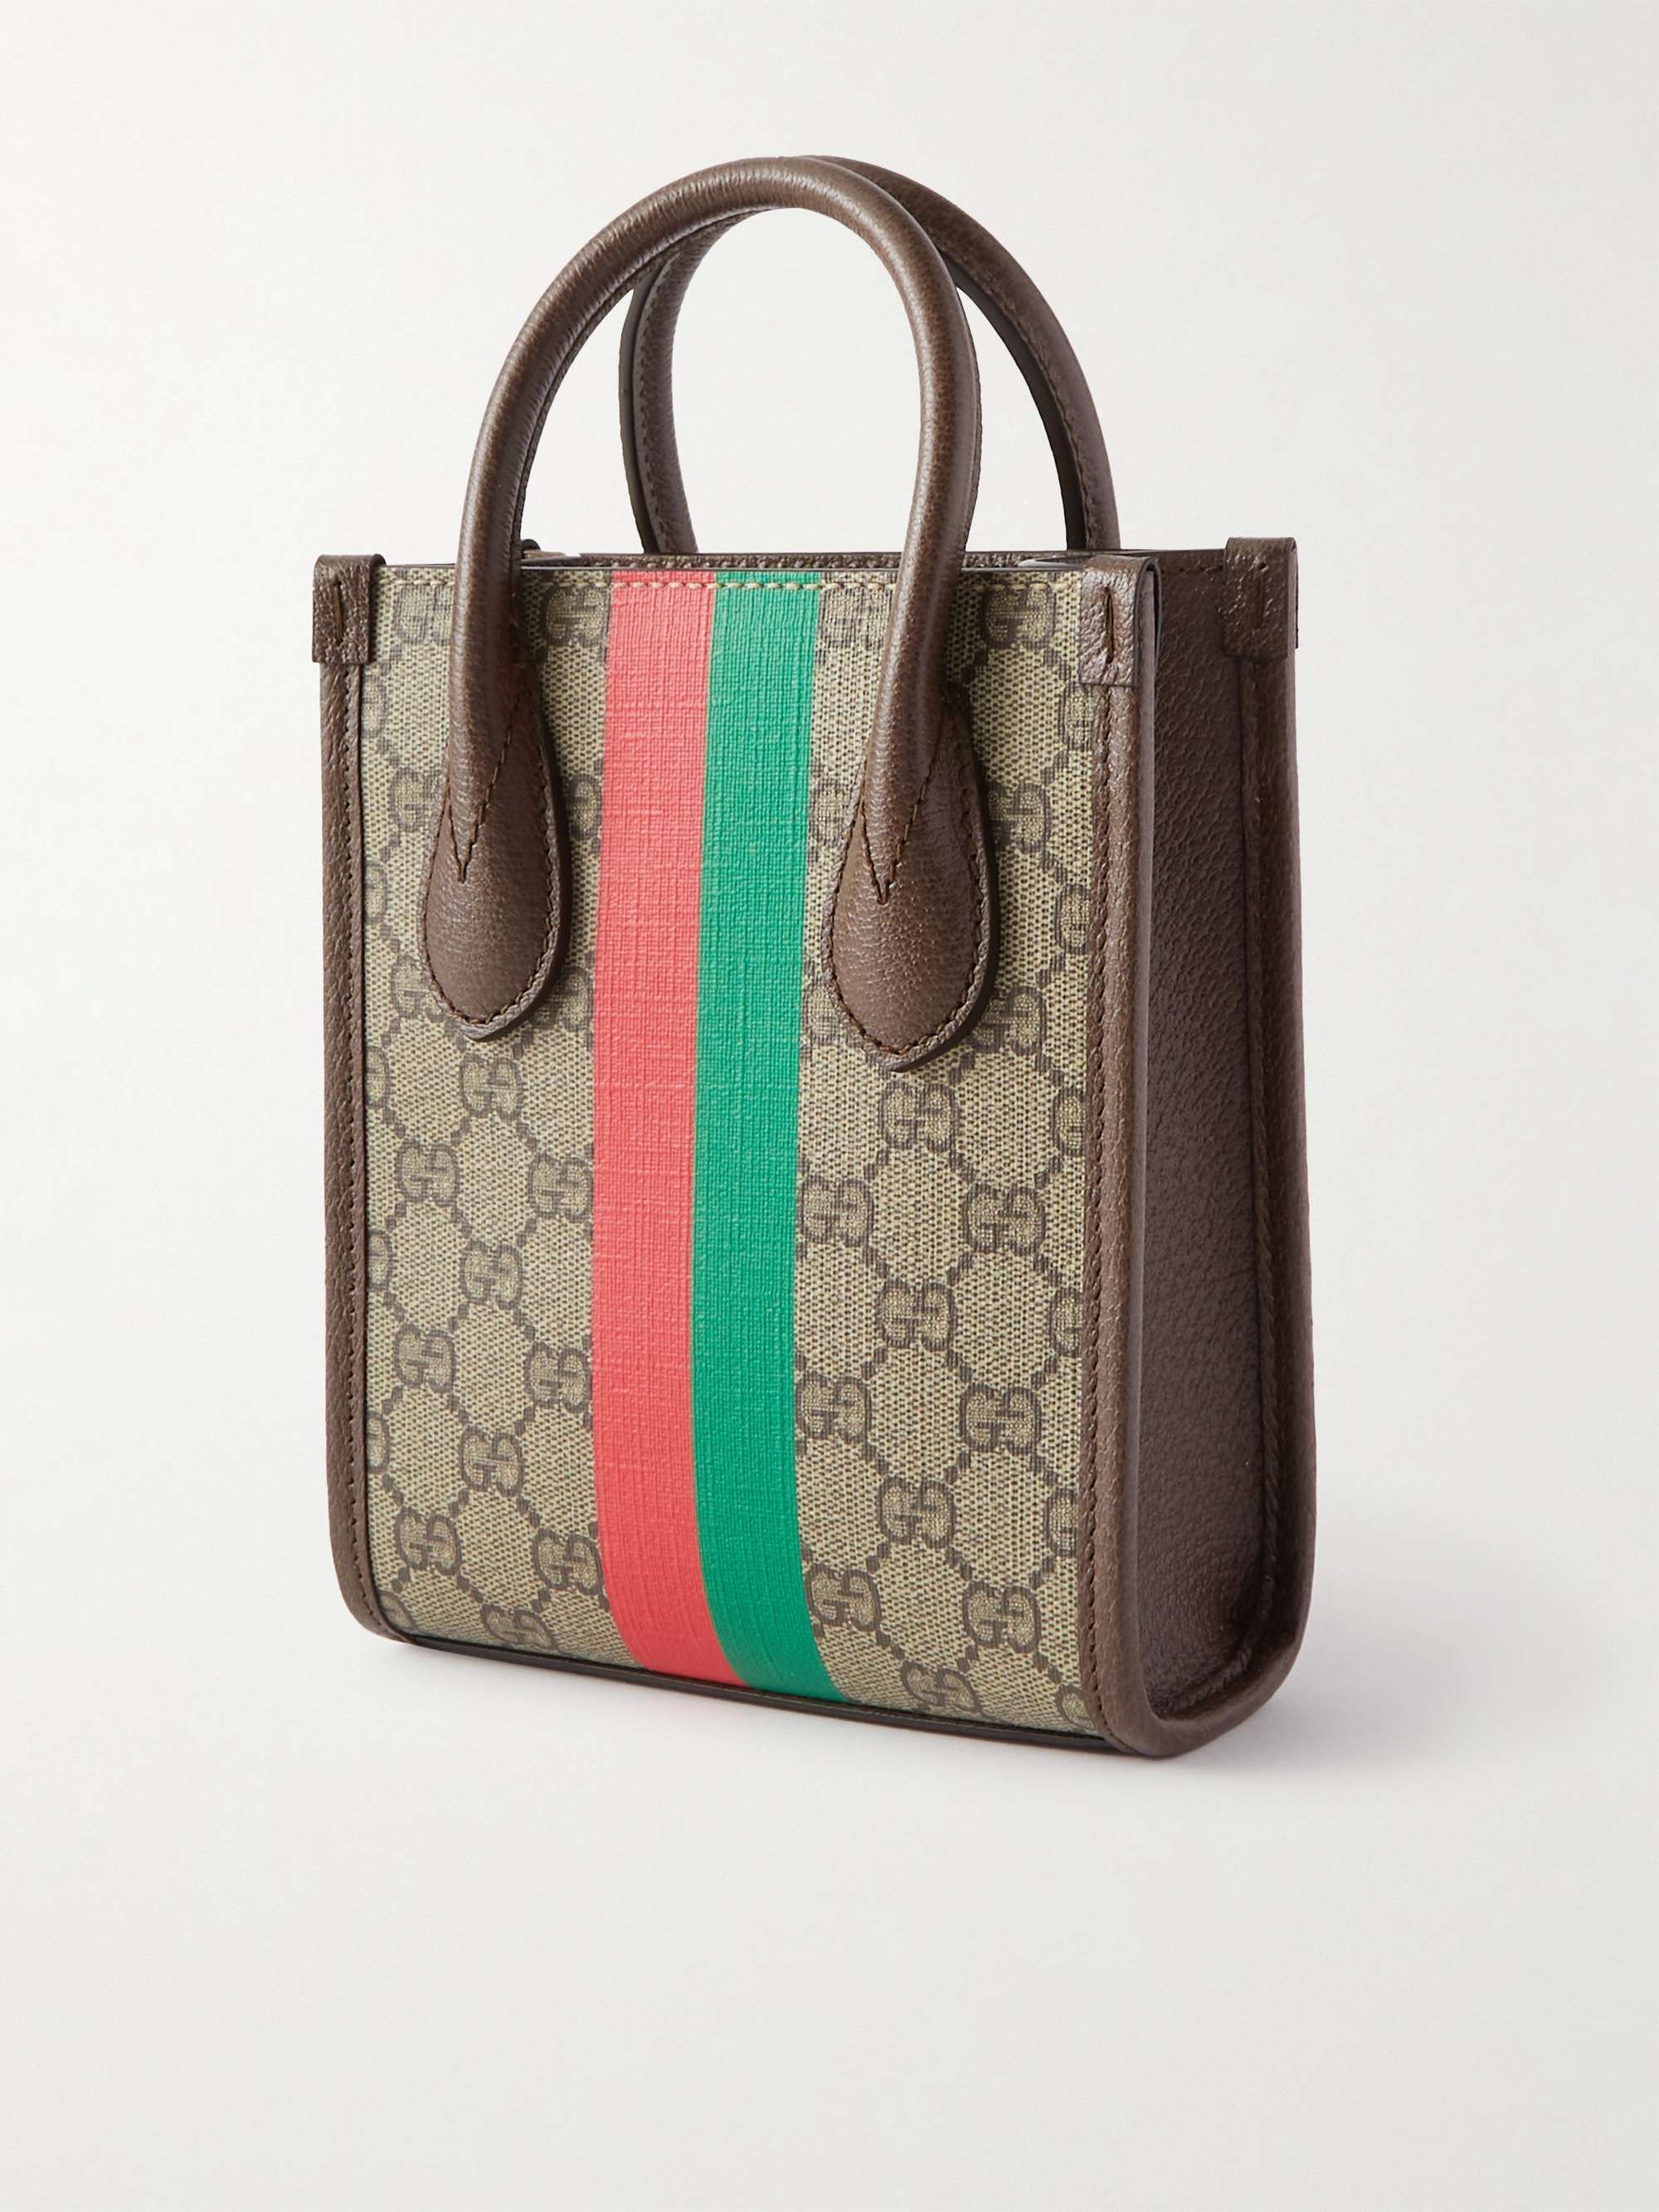 GUCCI GG Supreme Mini Leather-Trimmed Monogrammed Coated-Canvas Tote Bag